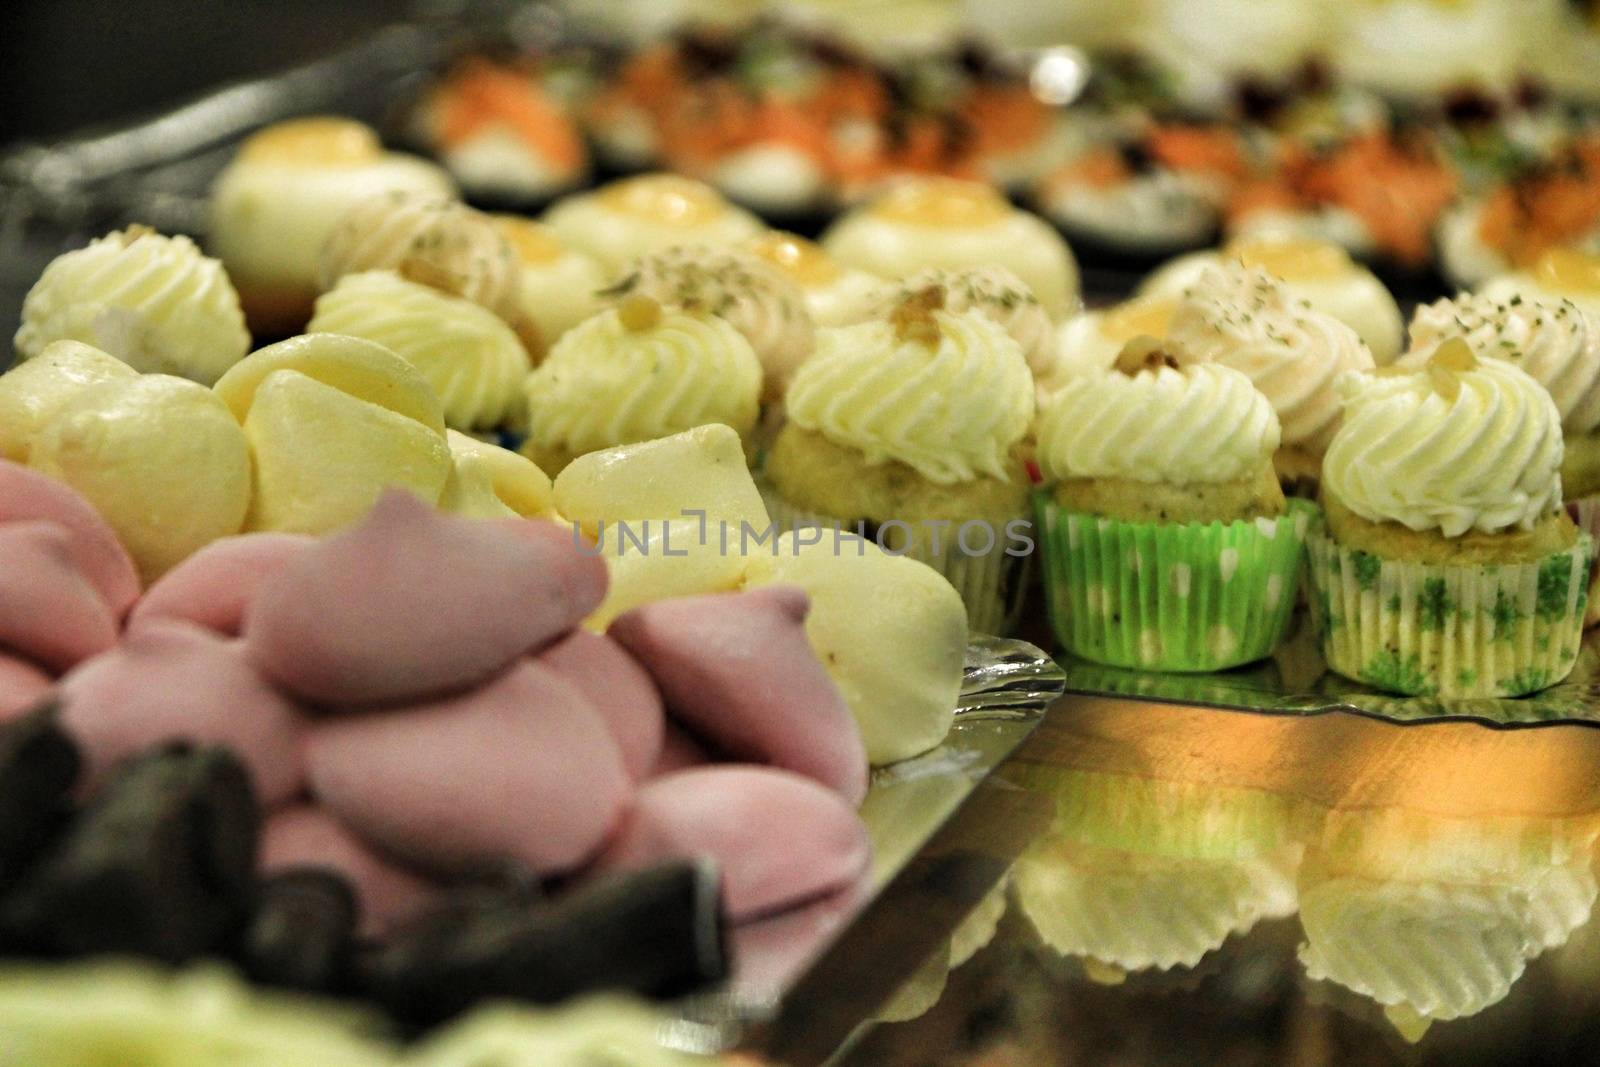 Tray of cakes and sweets in a pastry shop by soniabonet